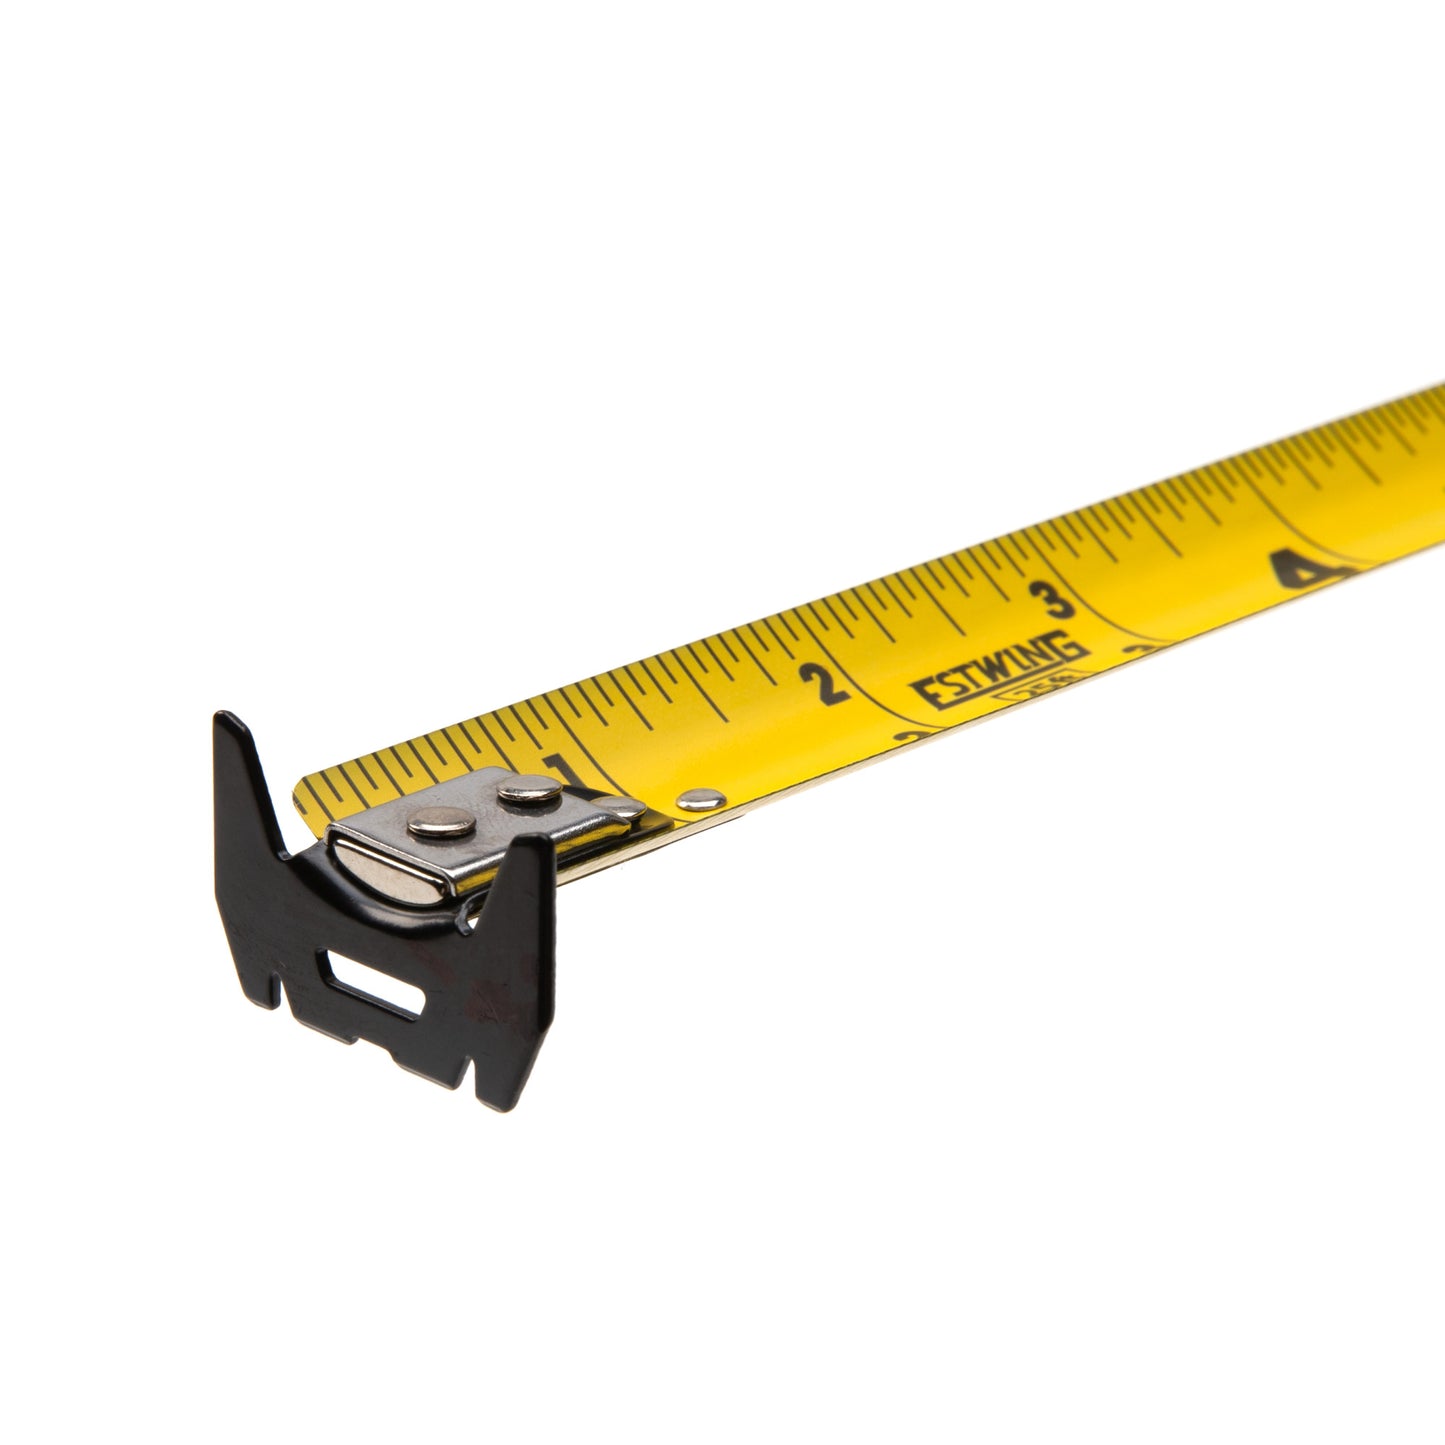 25-Foot Magnetic Tip Double-Sided Tape Measure